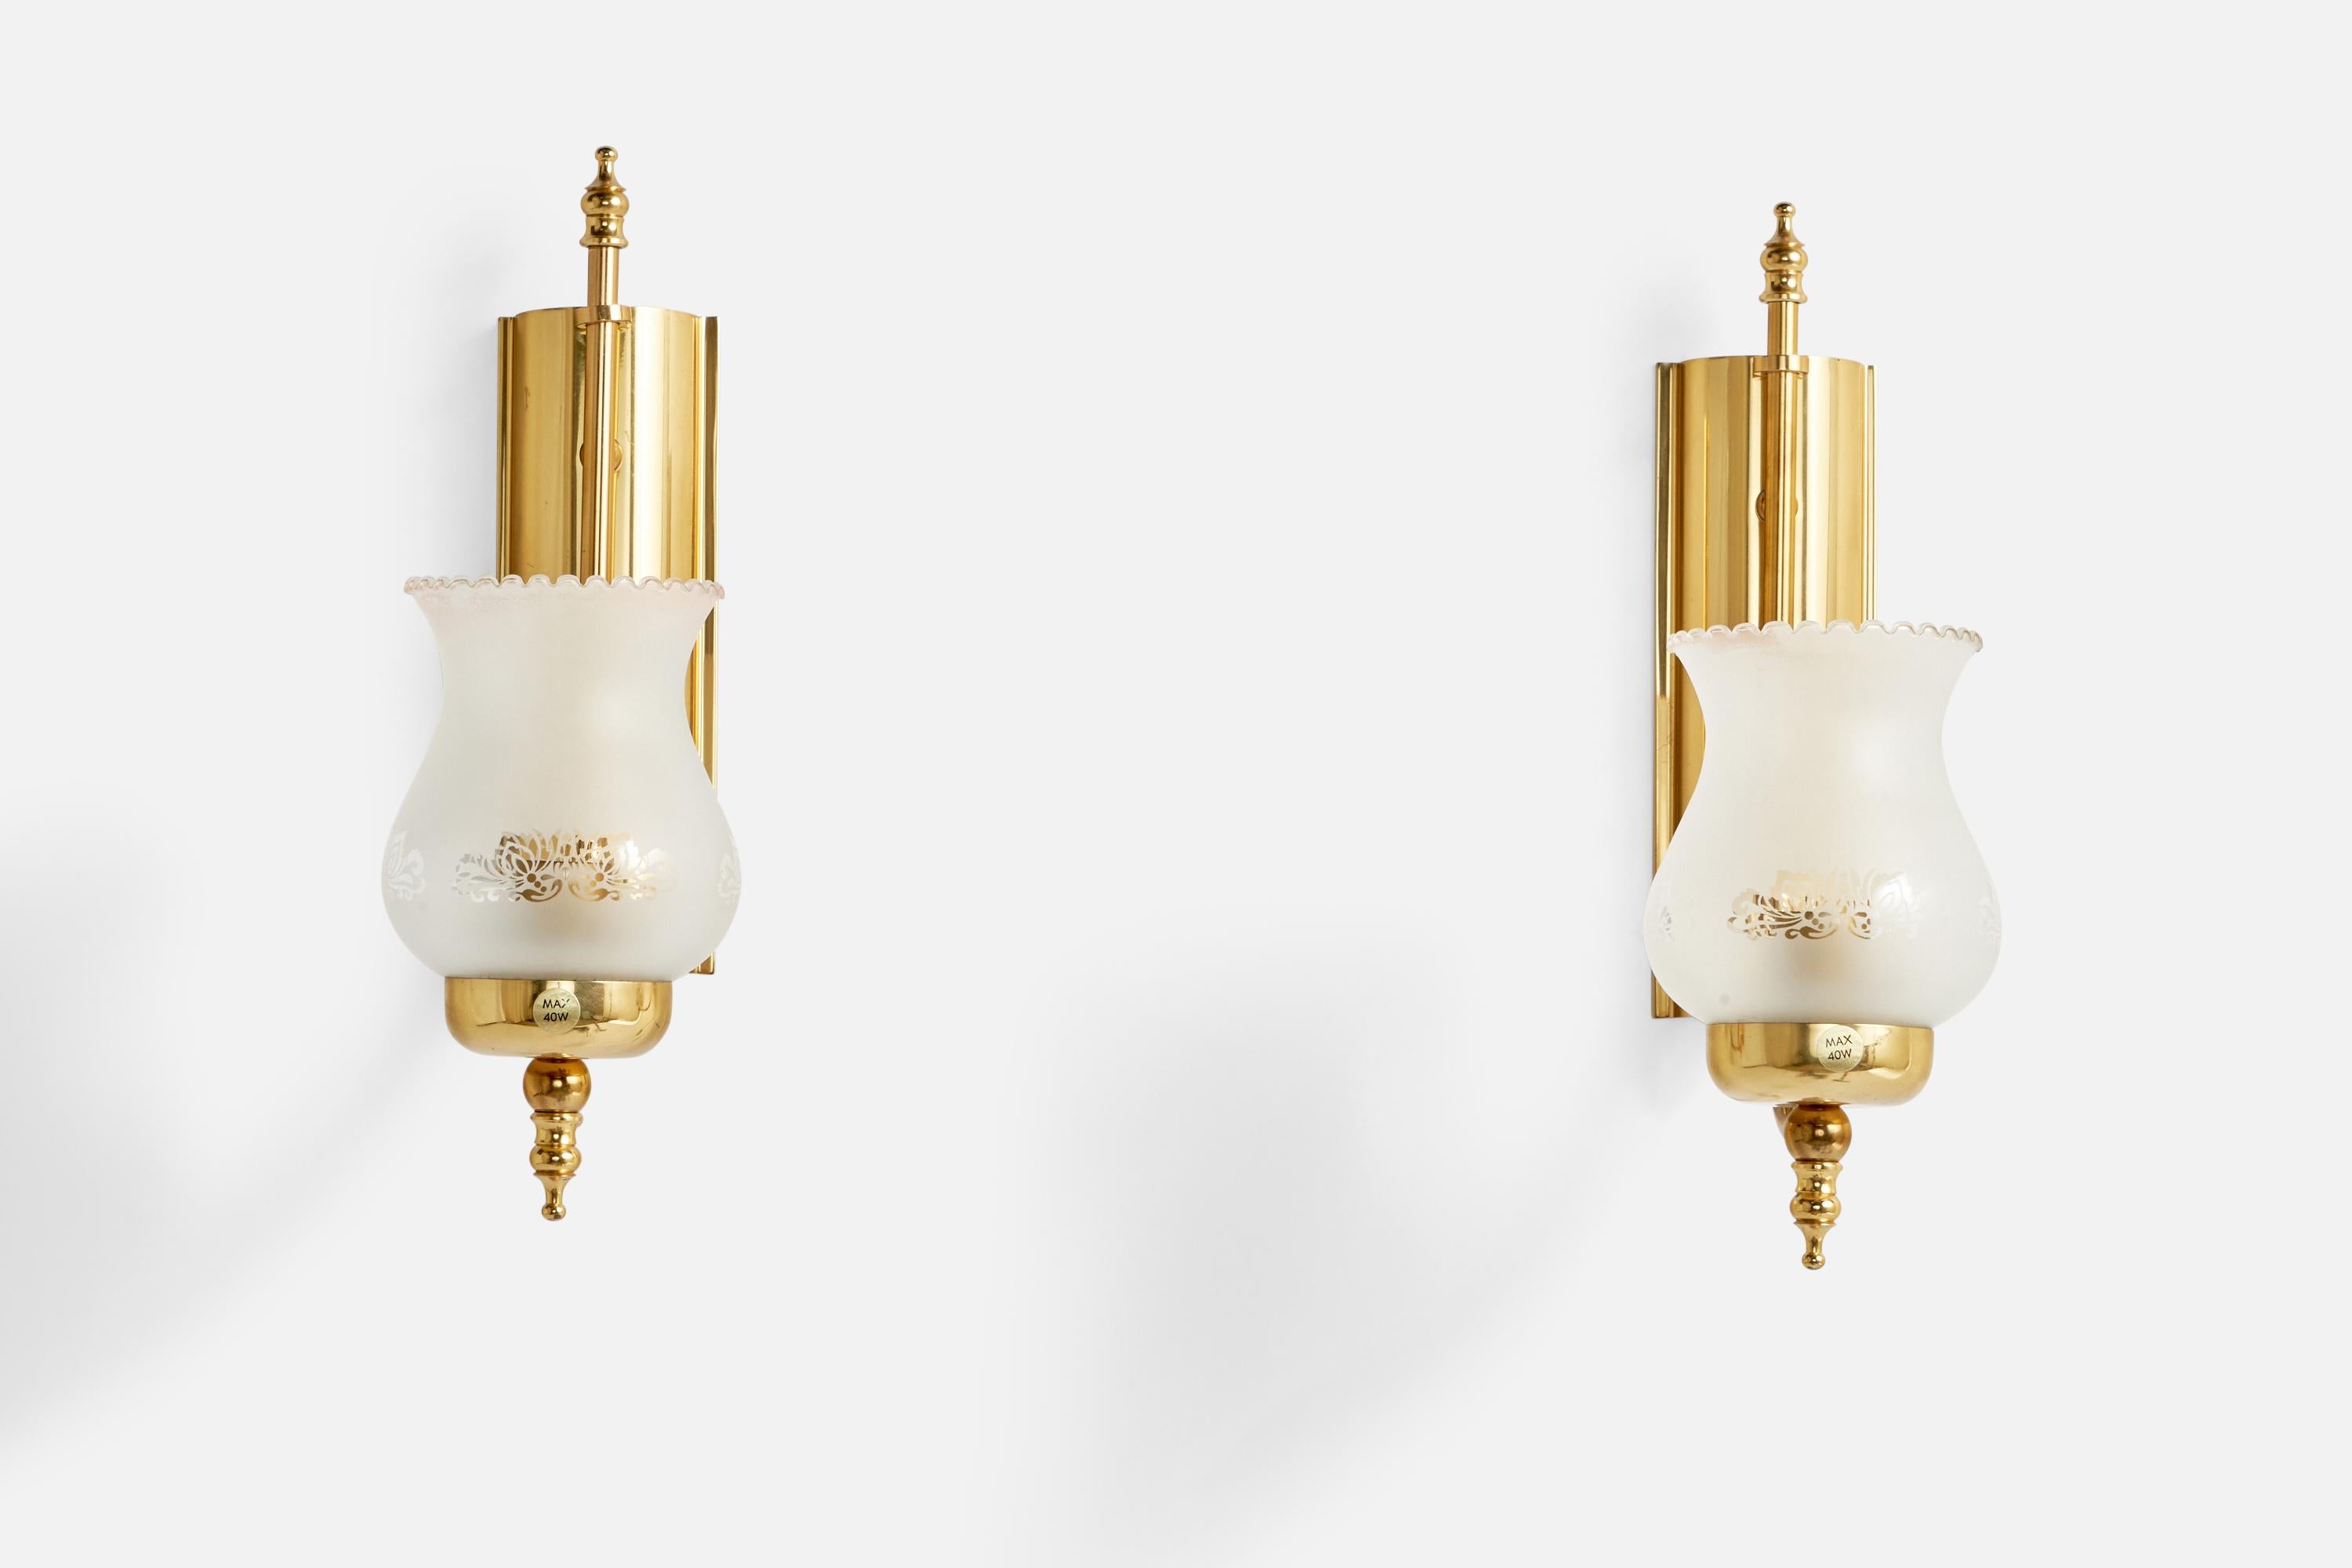 A pair of brass and etched glass wall lights designed and produced by GBW, Sweden, c. 1970s.

Overall Dimensions (inches): 12.25” H x 4” W x 8” D
Back Plate Dimensions (inches): 7.9” H x 2.65” W x 1.08” D
Bulb Specifications: E-14 Bulbs
Number of